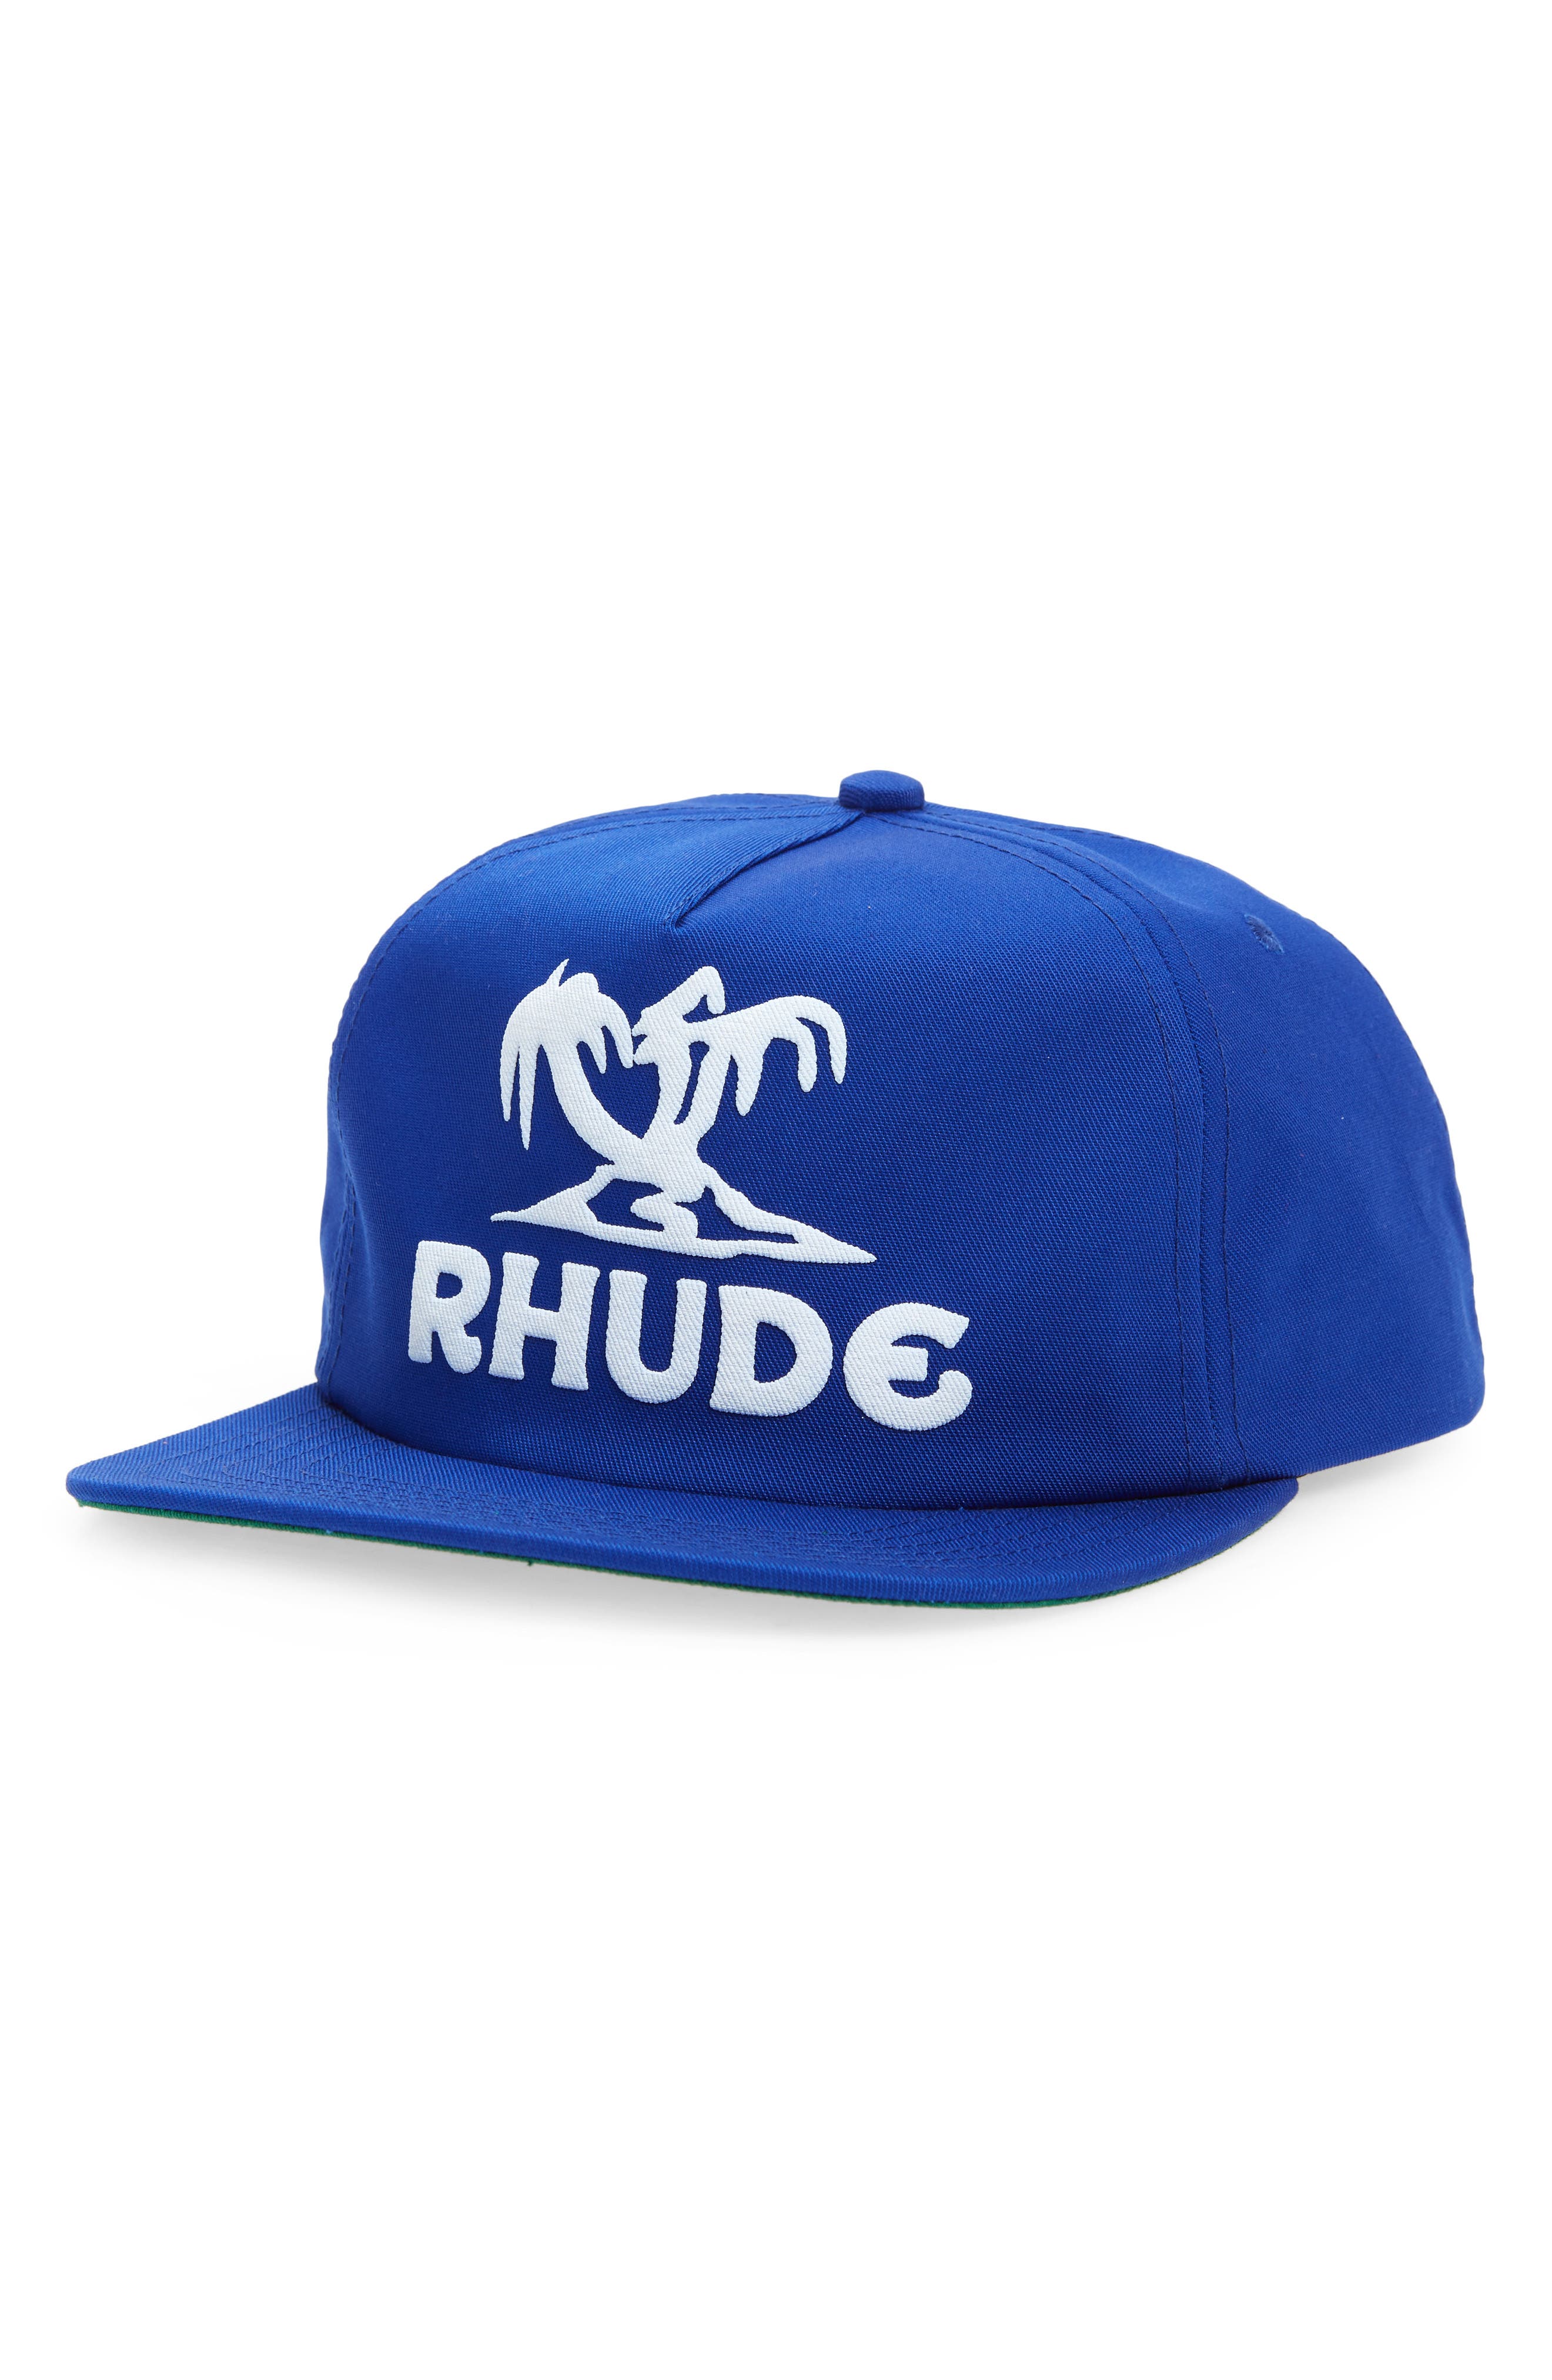 Rhude Palms Trucker Hat in Royal Blue at Nordstrom